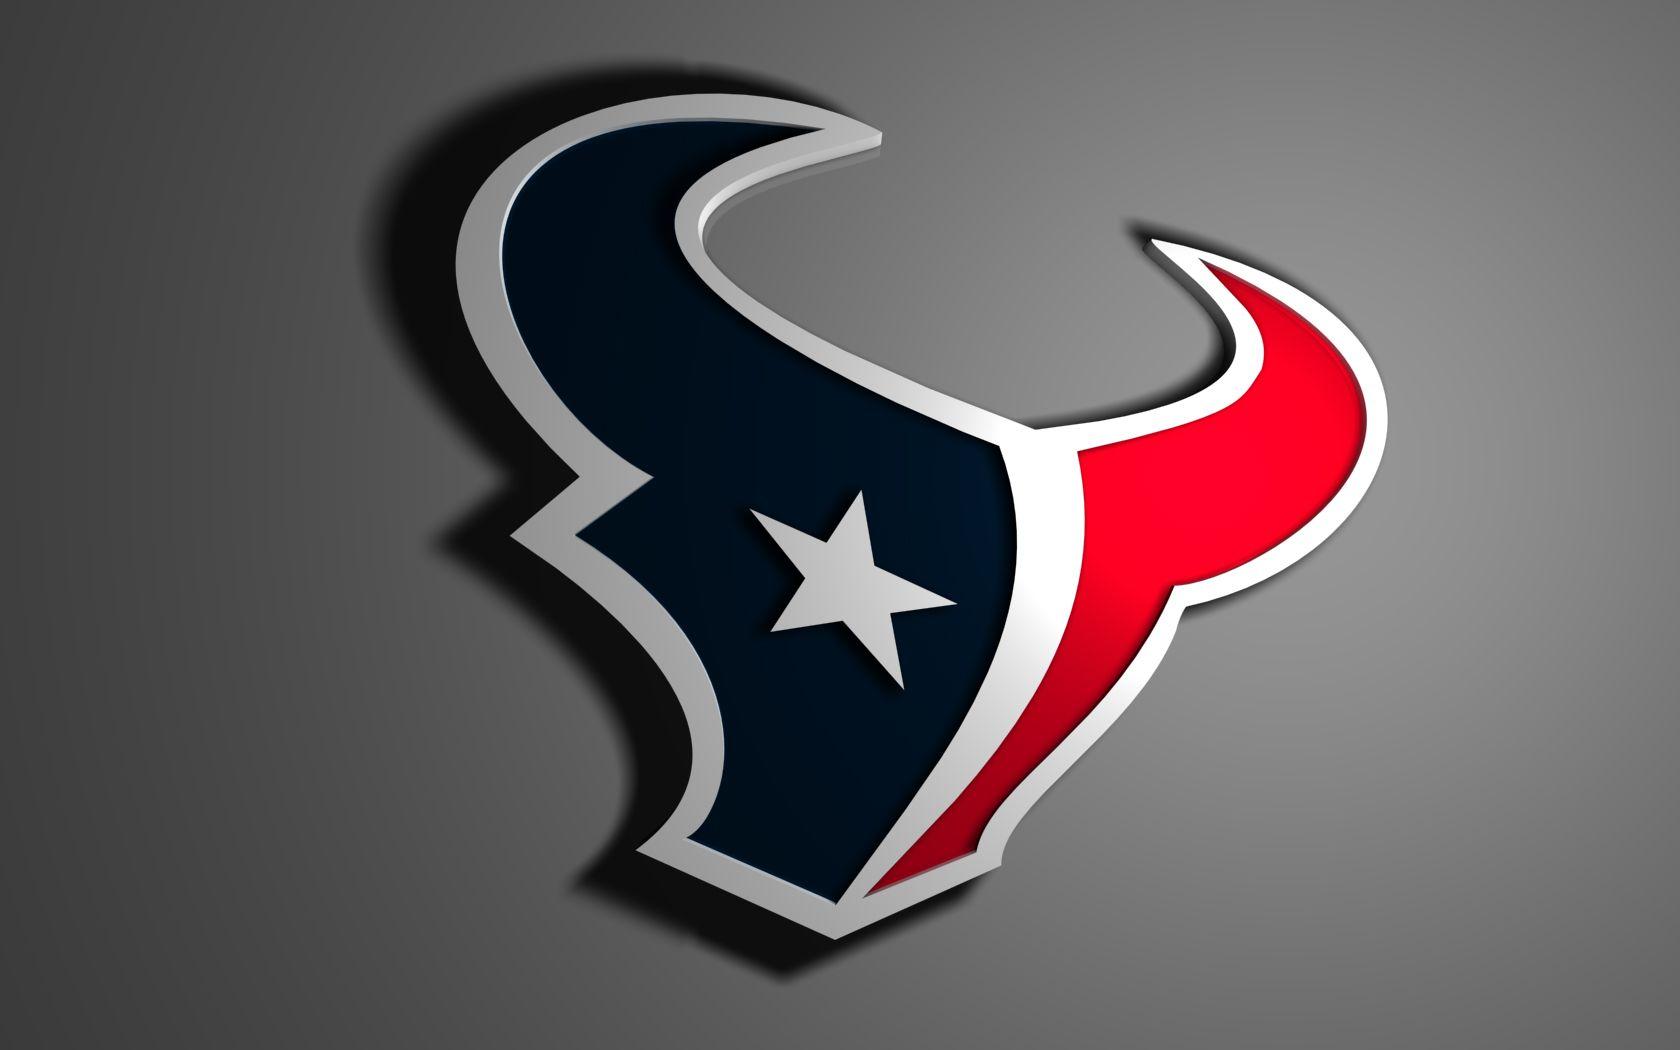 Houston Texans Wallpapers - Top Free